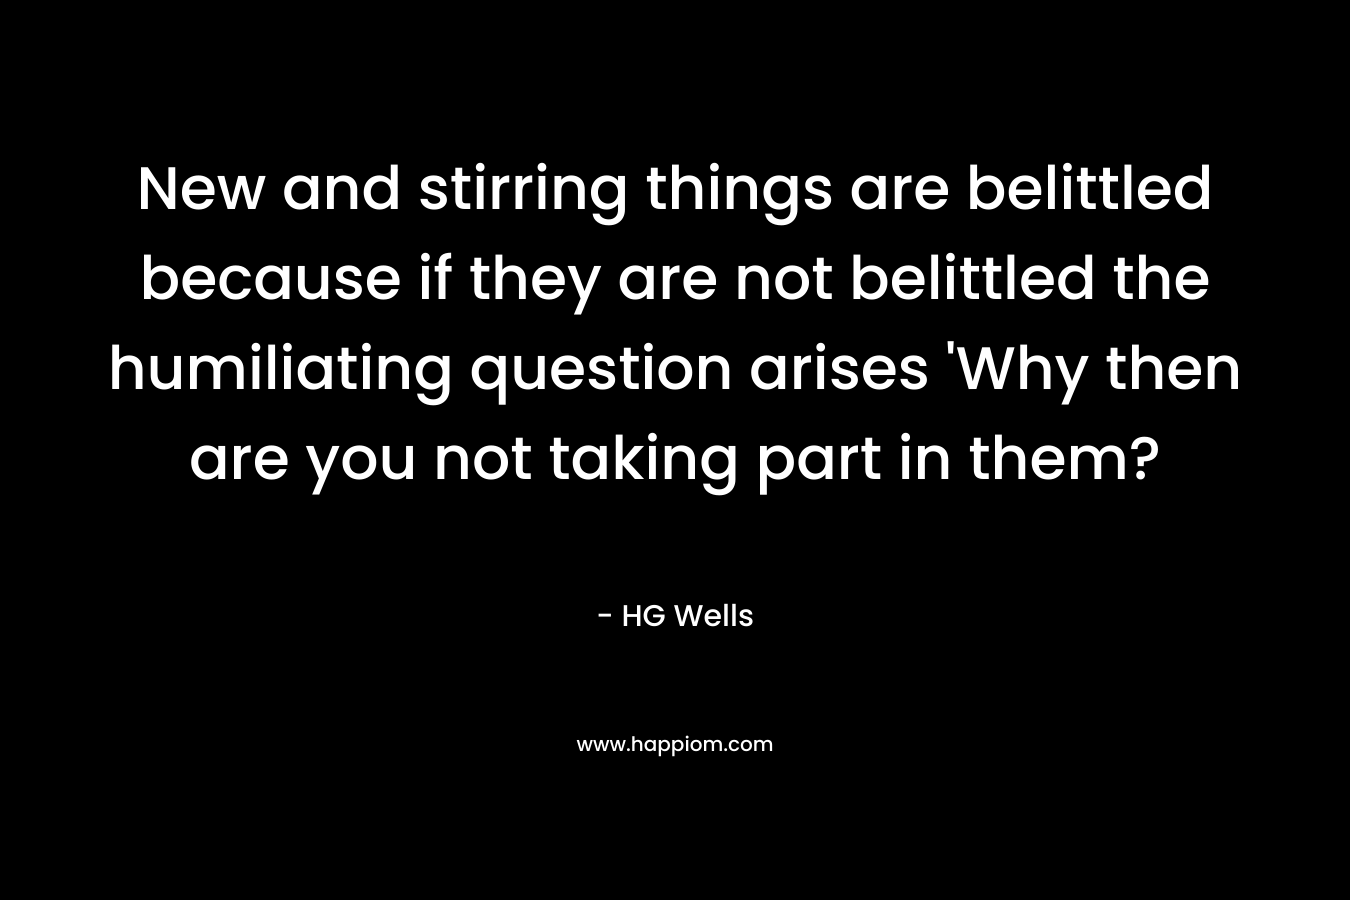 New and stirring things are belittled because if they are not belittled the humiliating question arises 'Why then are you not taking part in them?